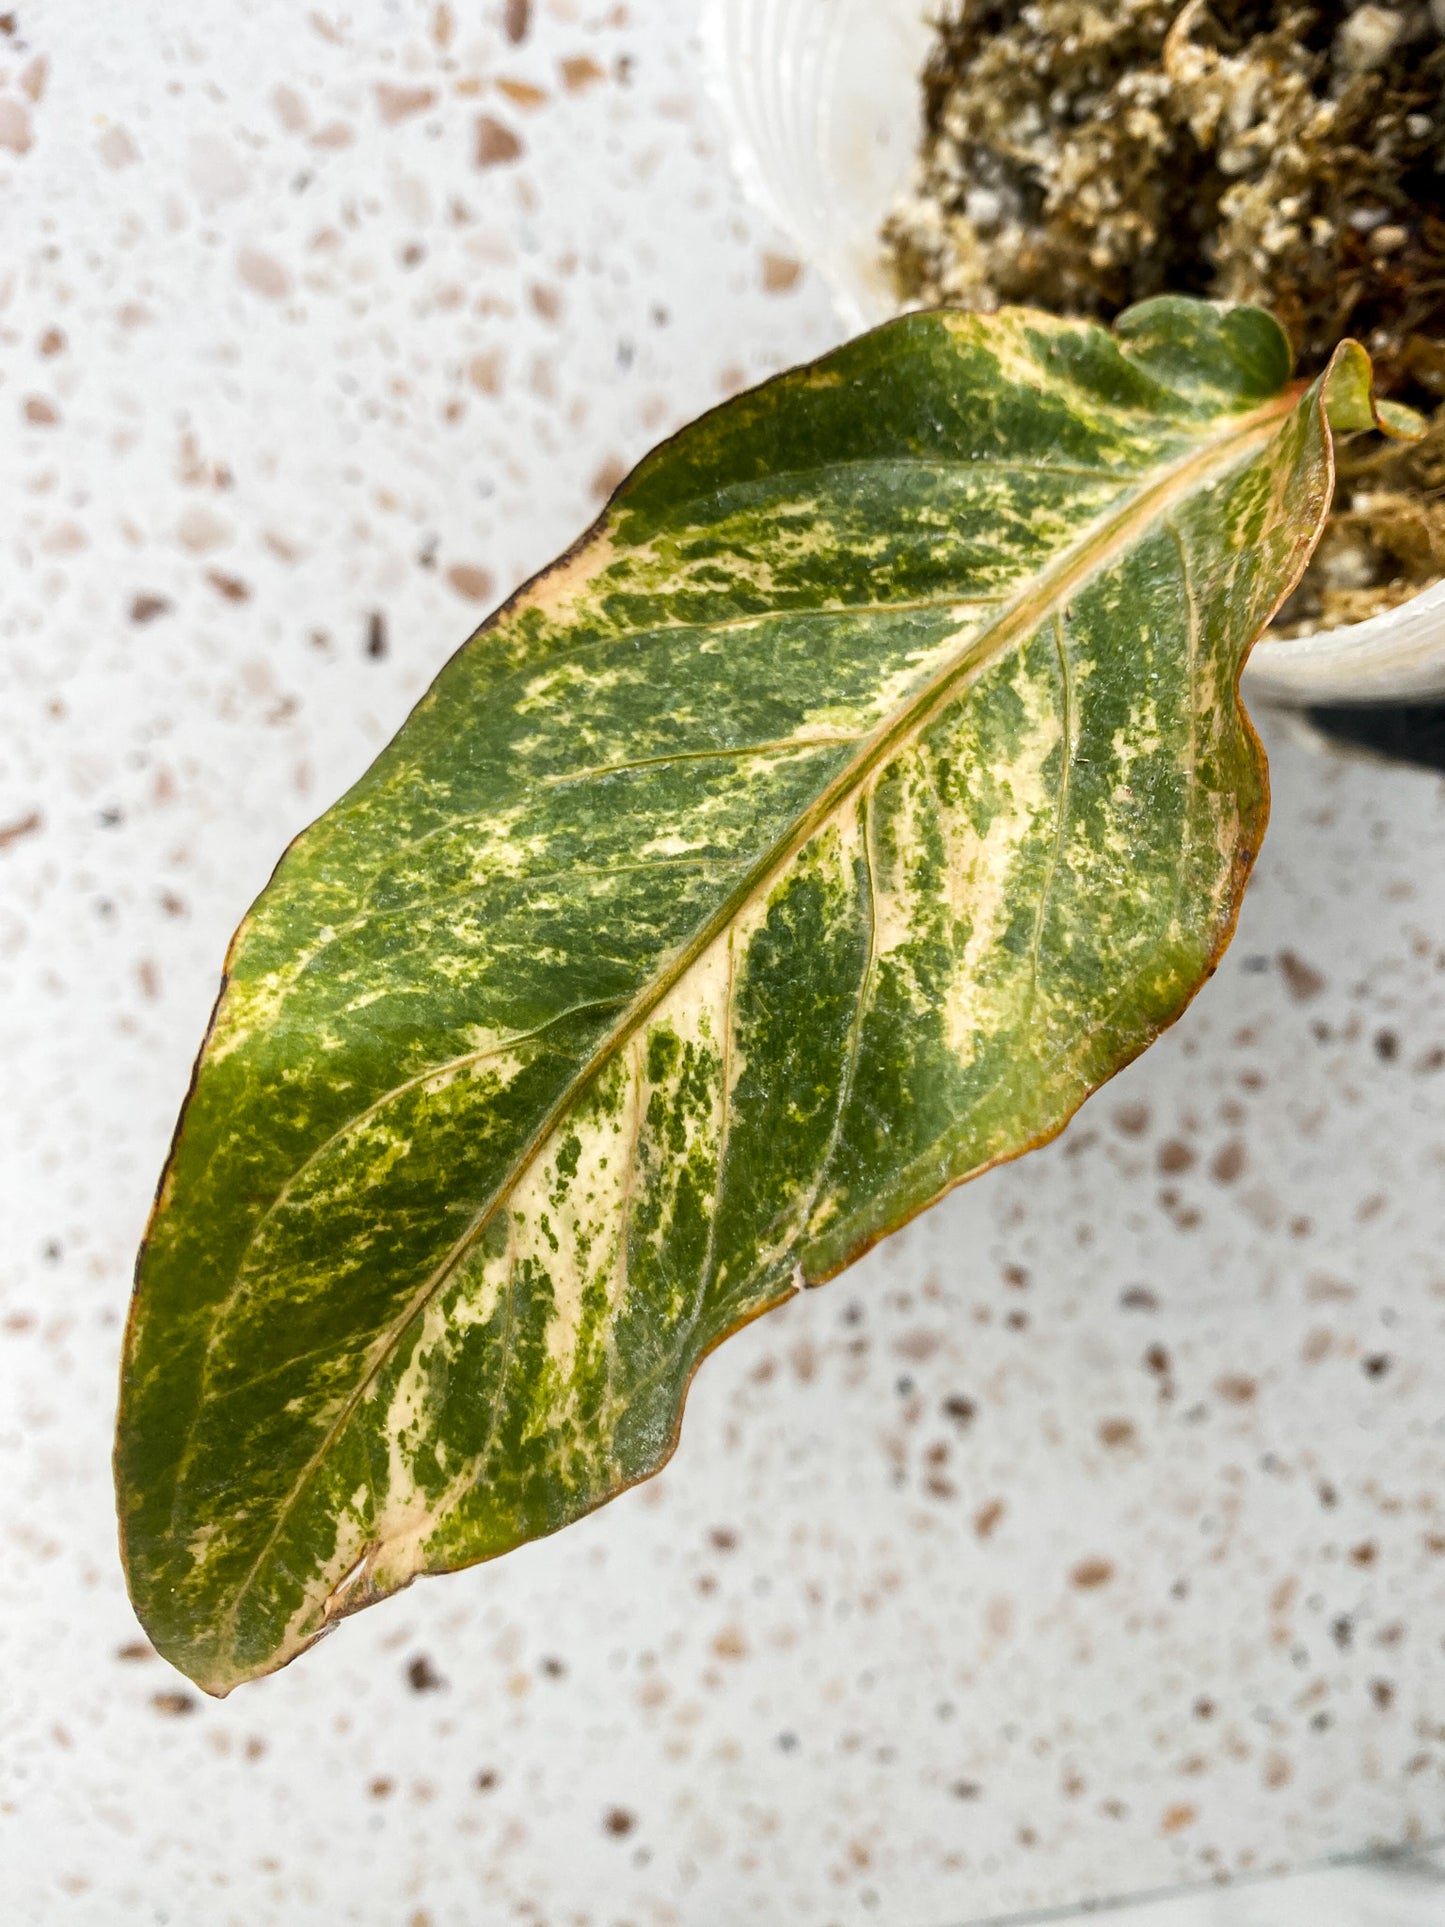 Anthurium Renaissance Variegated (pink dragon) 1 leaf rooted in moss